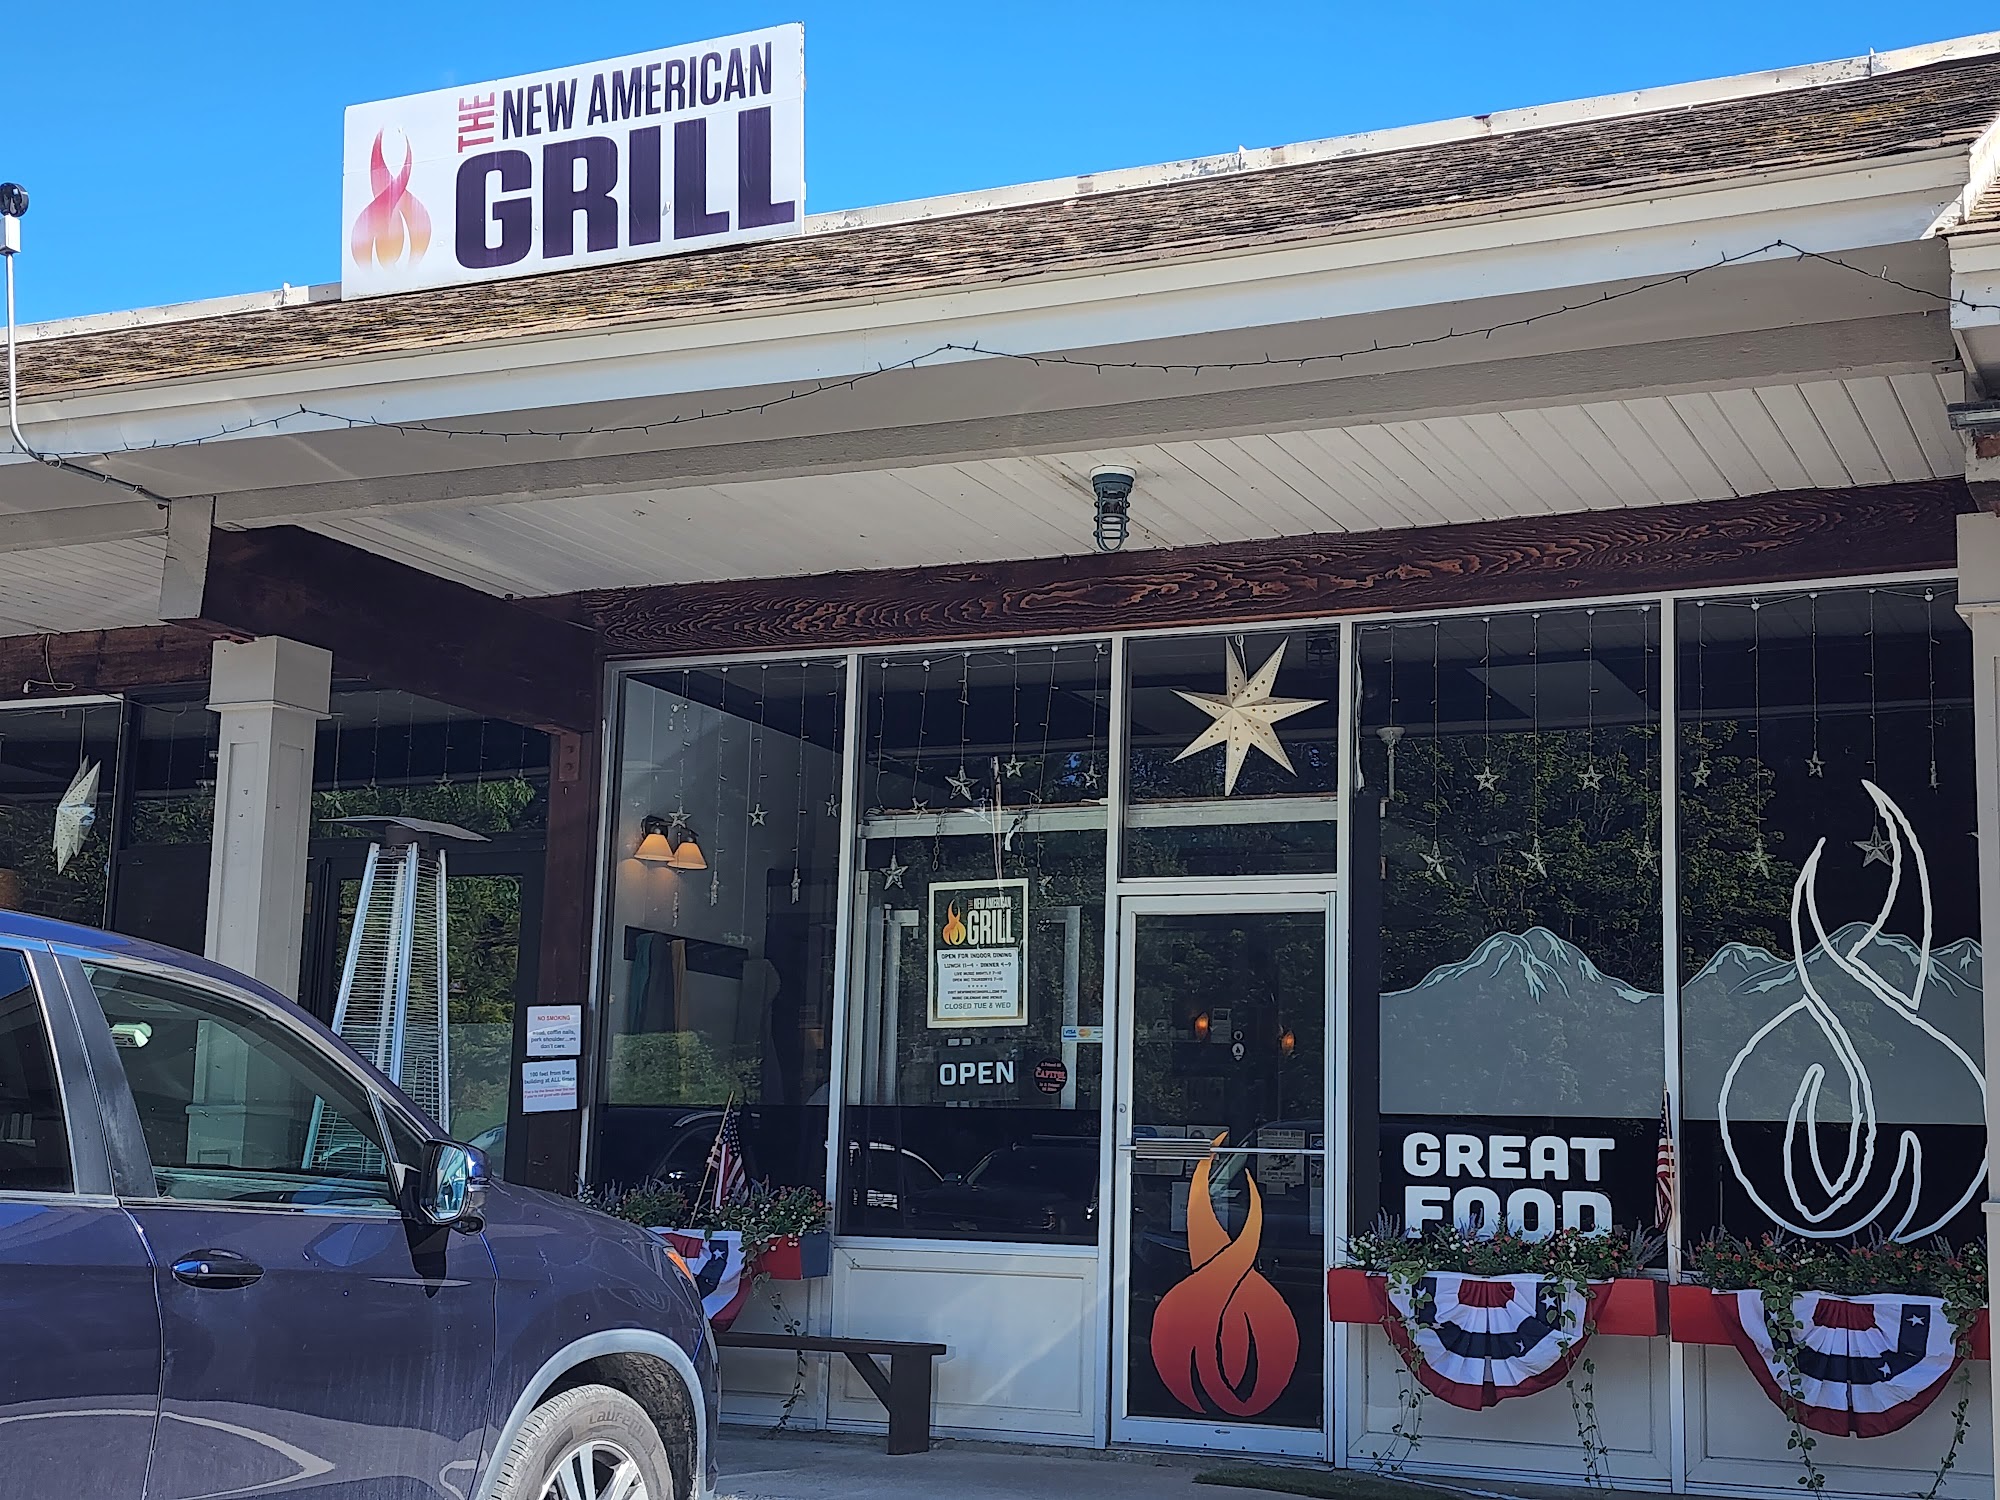 The New American Grill